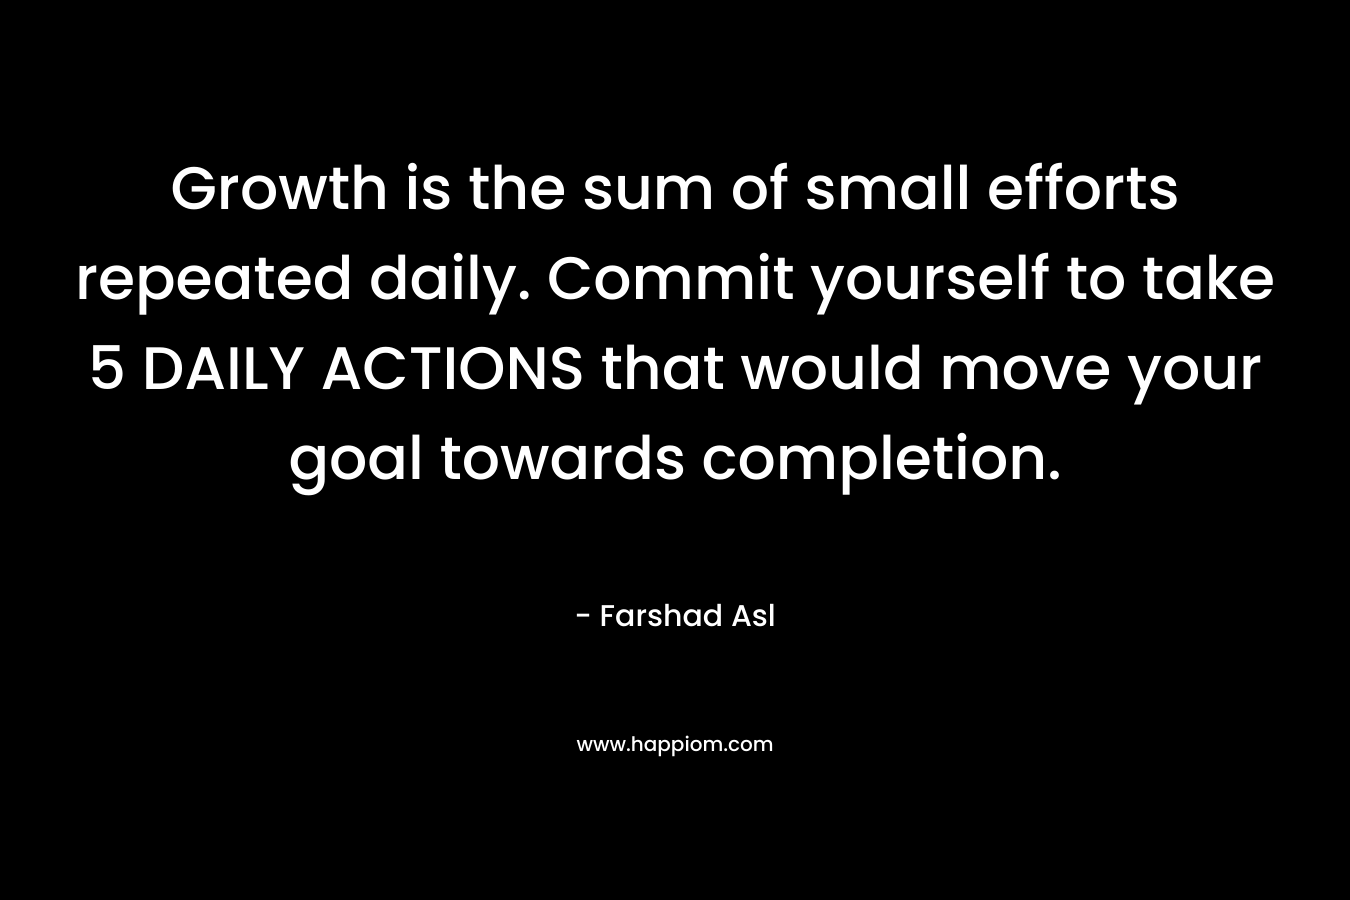 Growth is the sum of small efforts repeated daily. Commit yourself to take 5 DAILY ACTIONS that would move your goal towards completion.